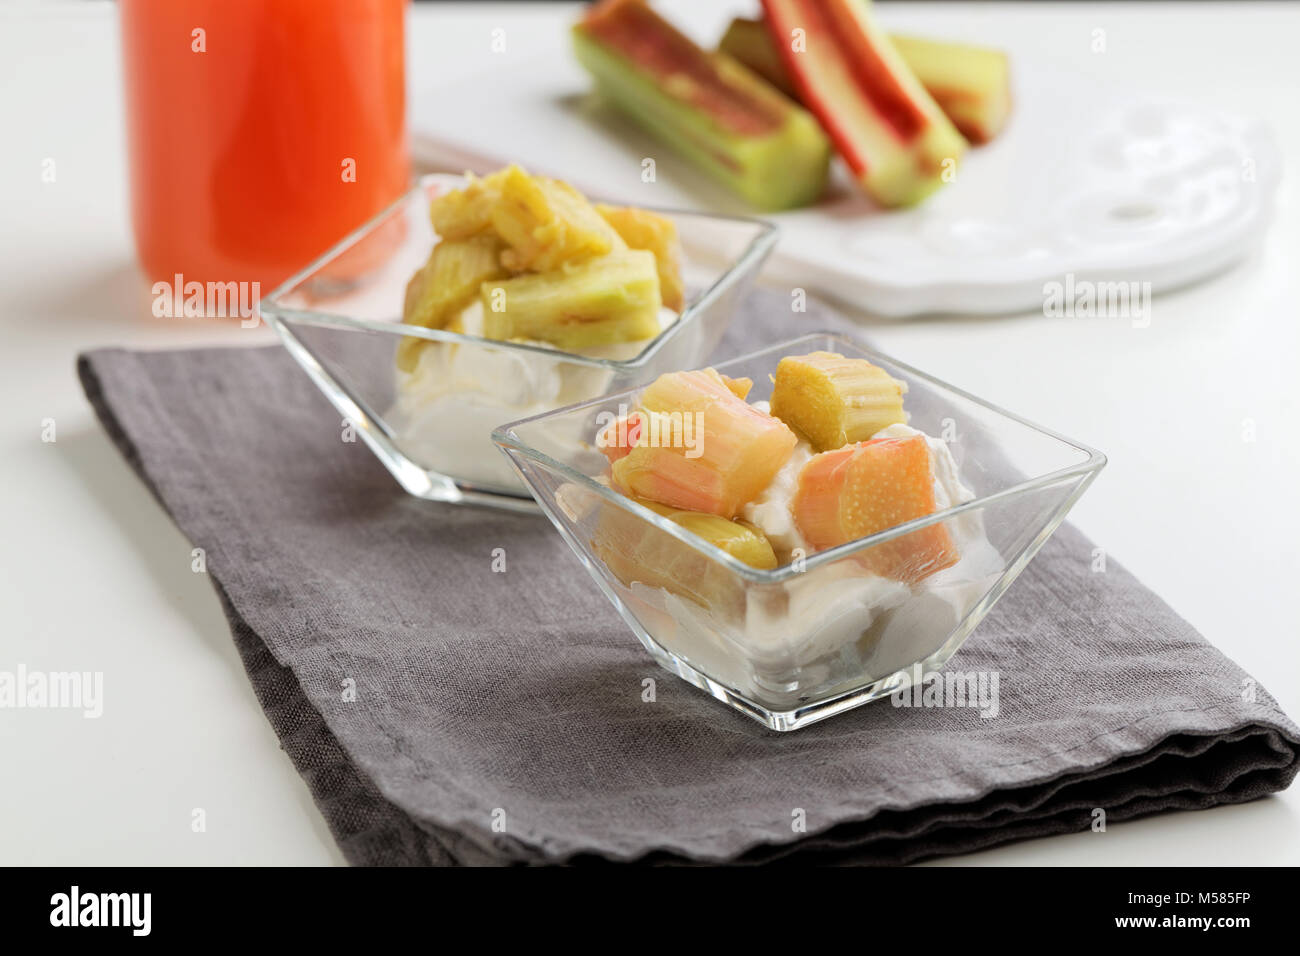 Rhubarb dessert with soft cheese Stock Photo